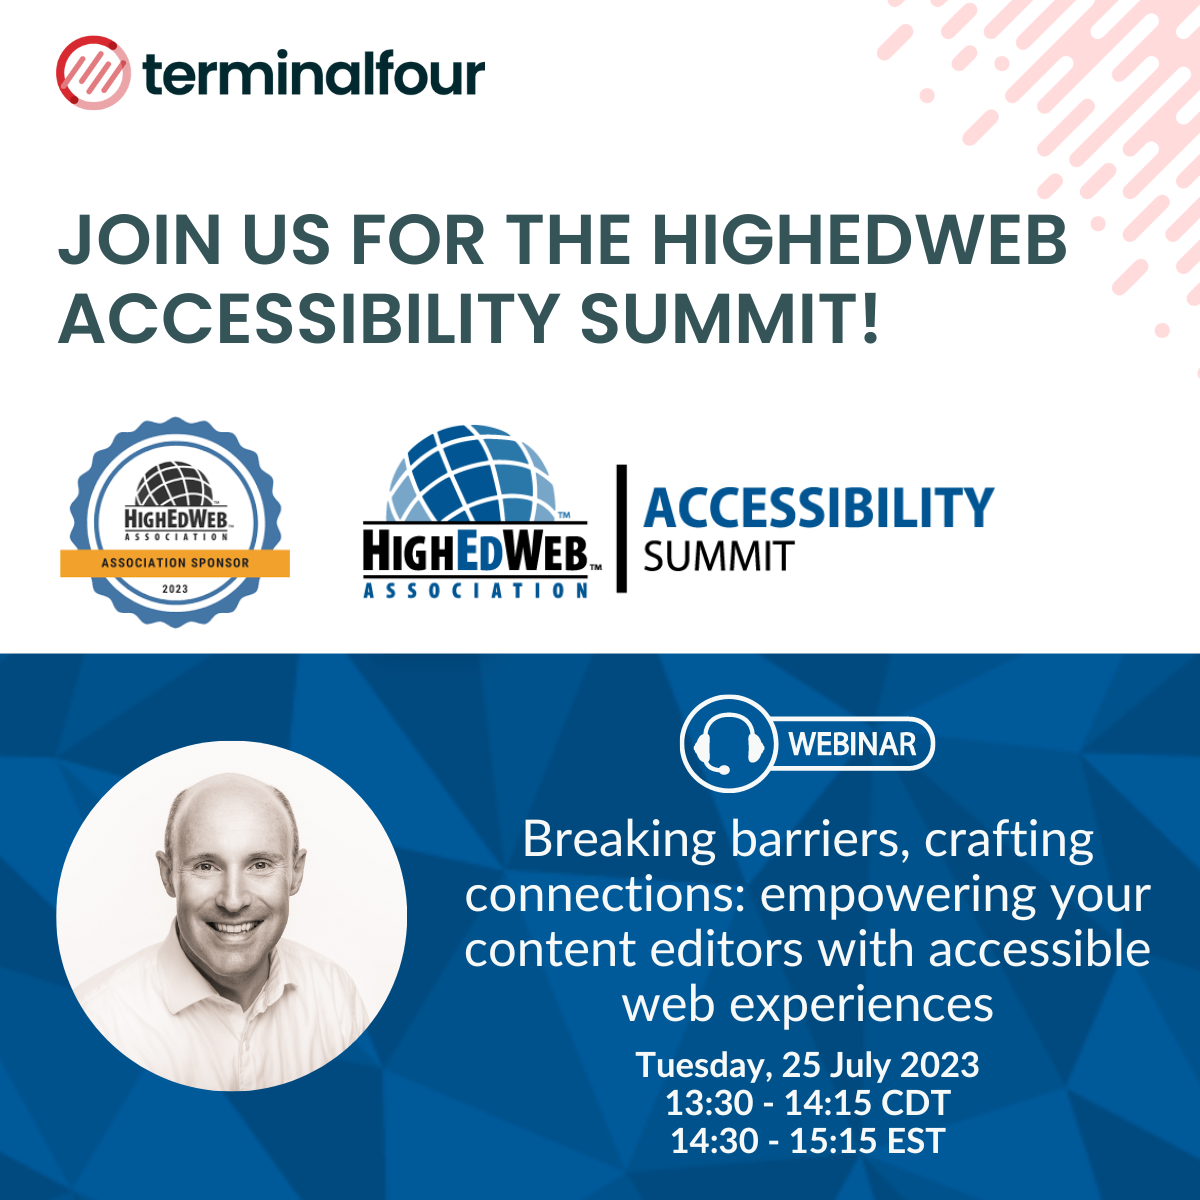 Terminalfour Association and Gold Sponsors of HighEdWeb Accessibility Summit